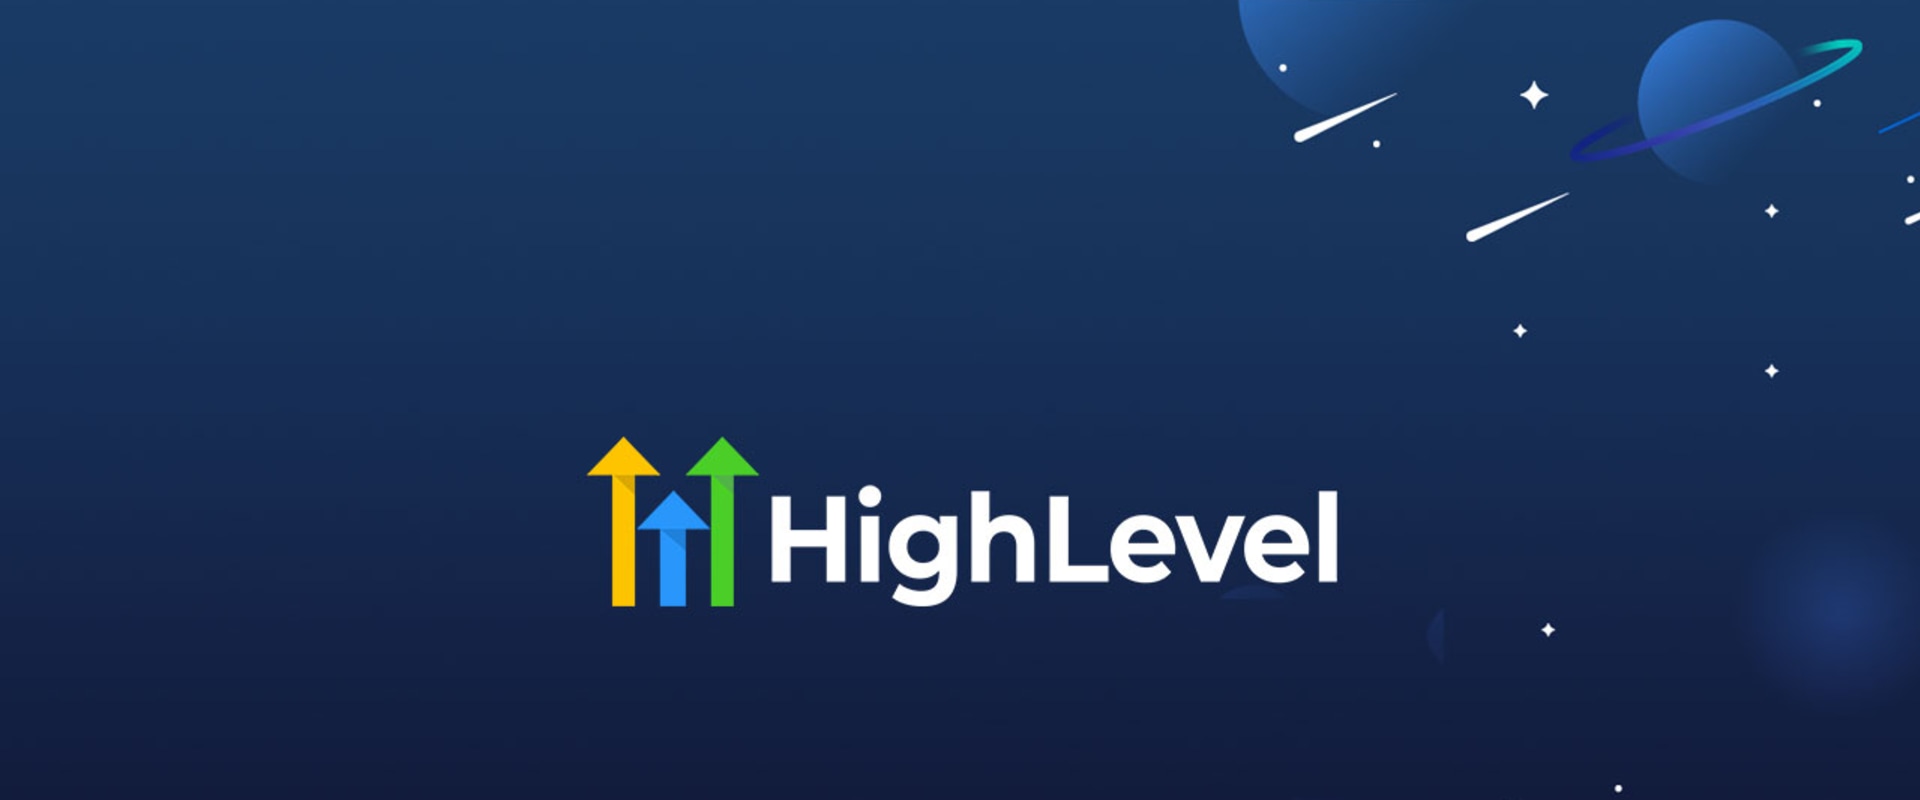 Tracking Success and Making Adjustments as Needed: Implementing gohighlevel into Your Business